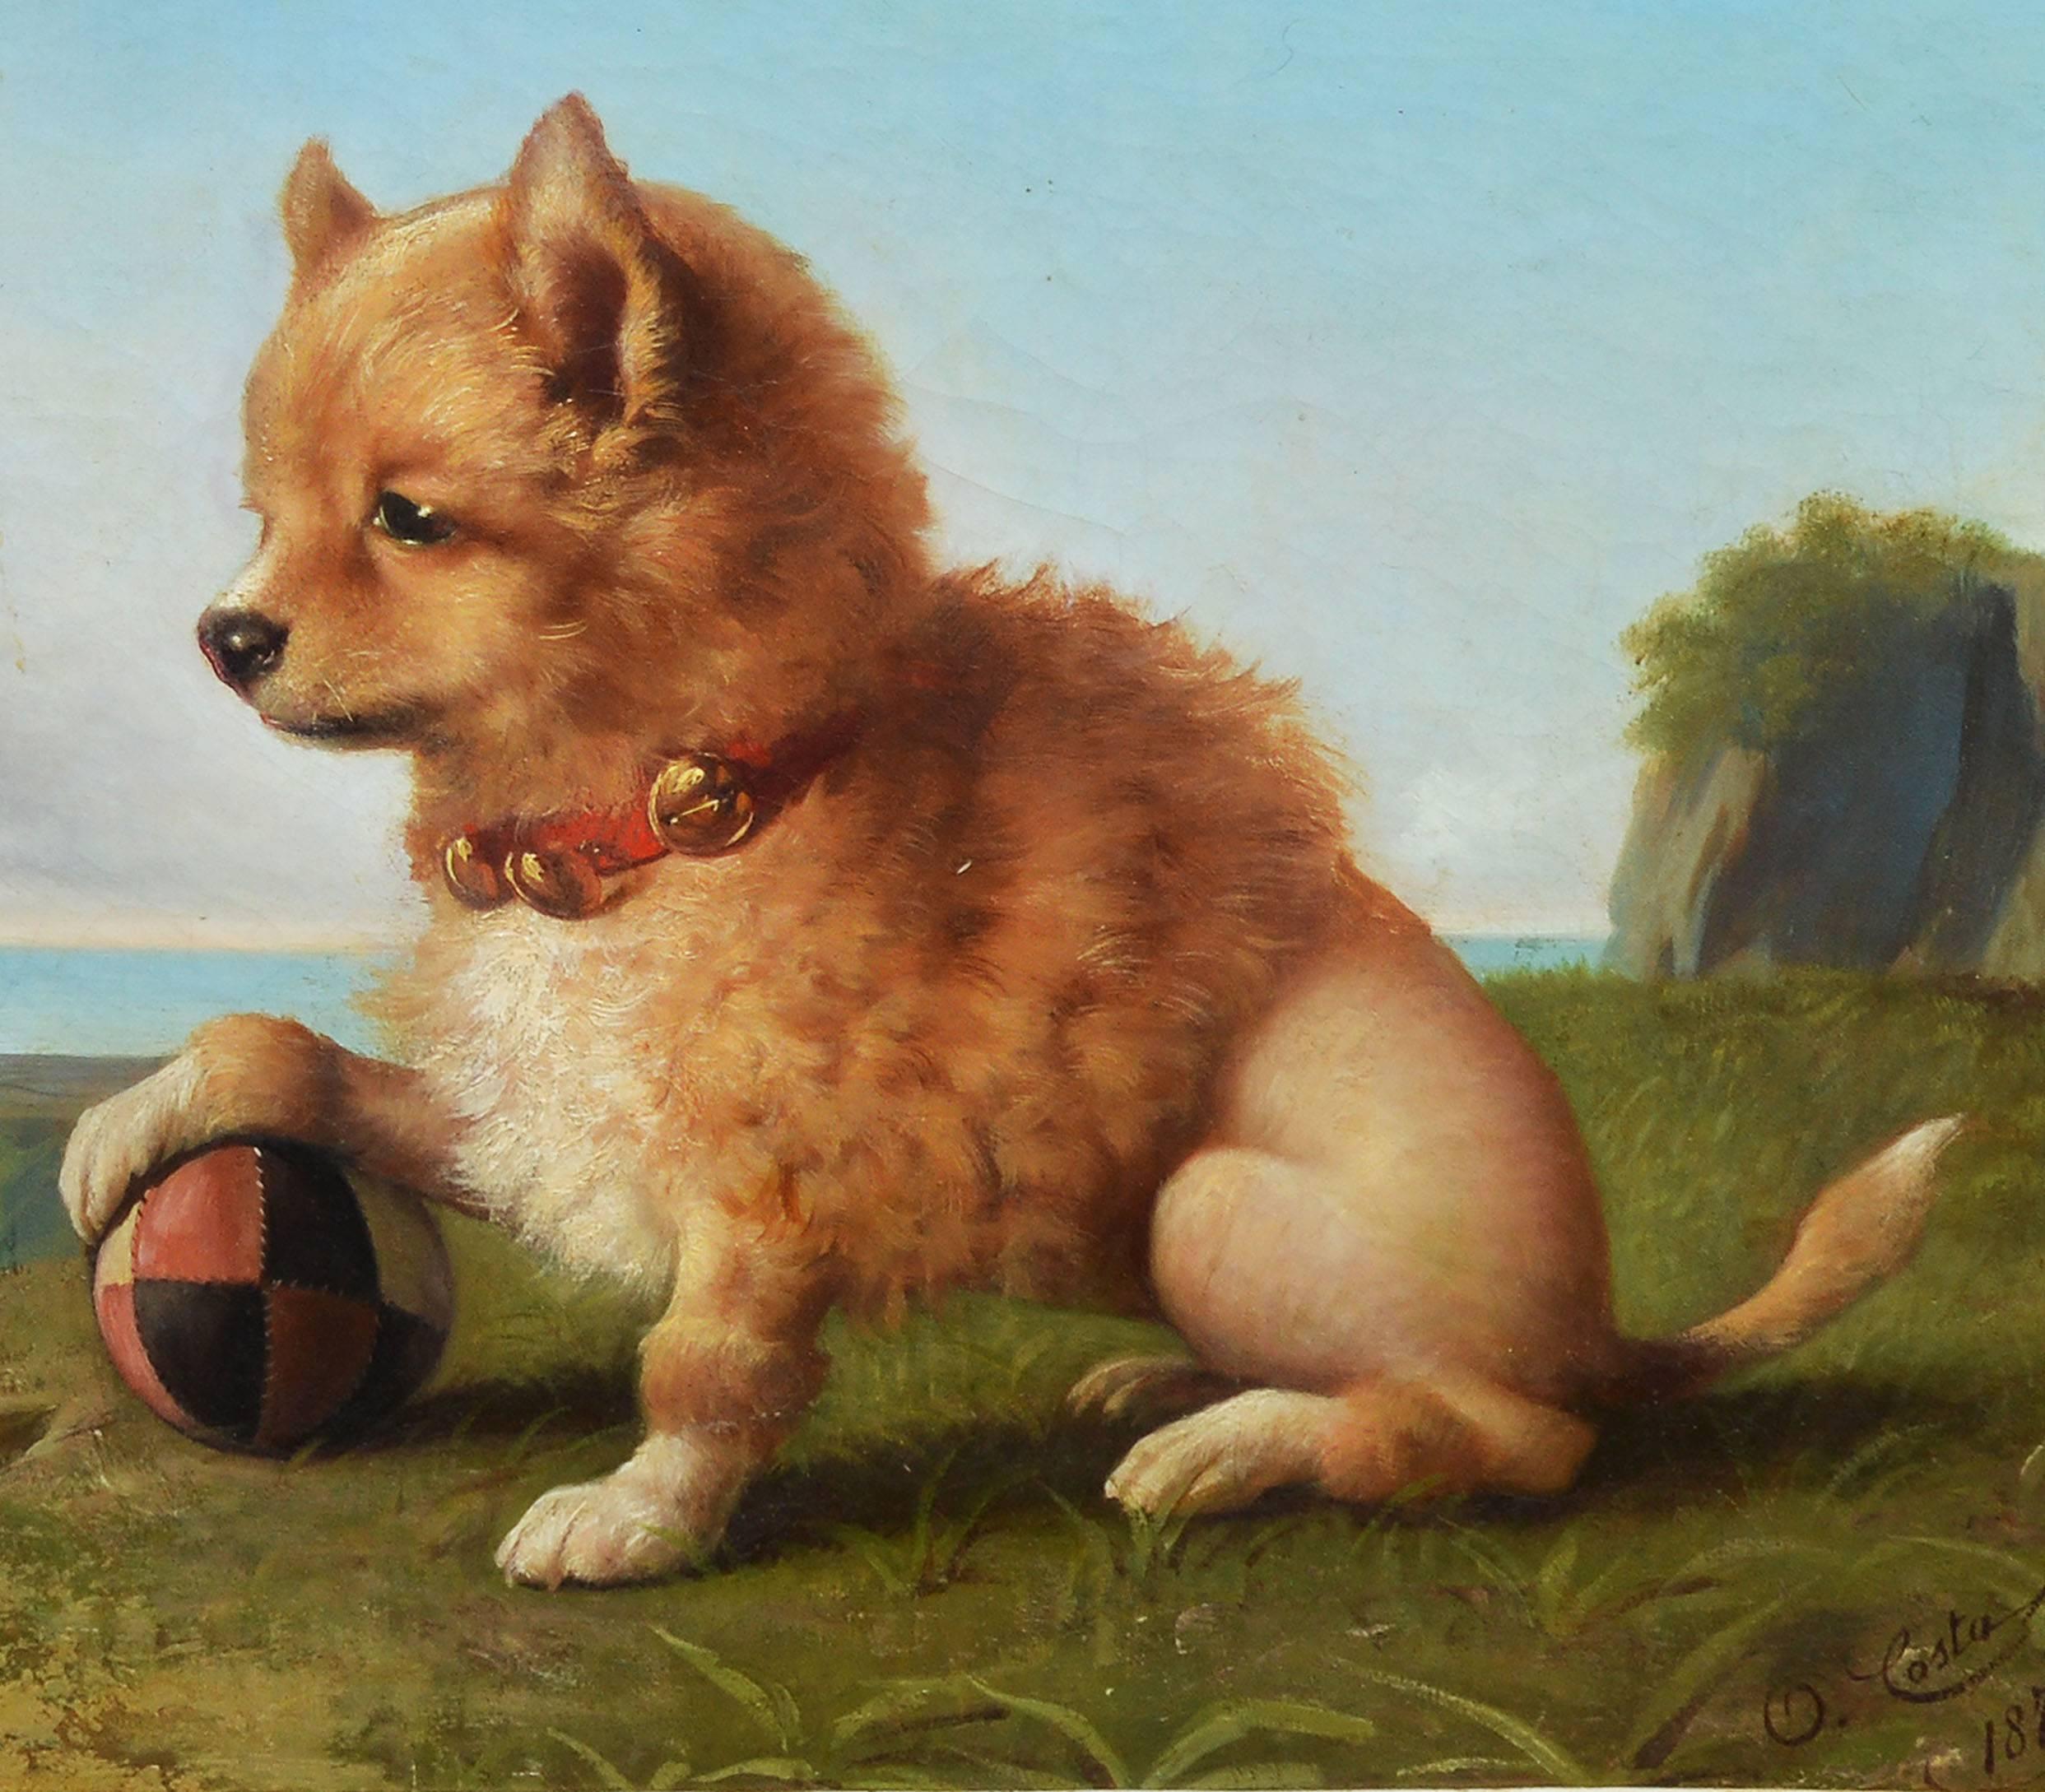 Realist portrait of a Pomeranian Dog by Oreste Costa (1851-1901).  Oil on canvas, circa 1880.  Signed lower right, 